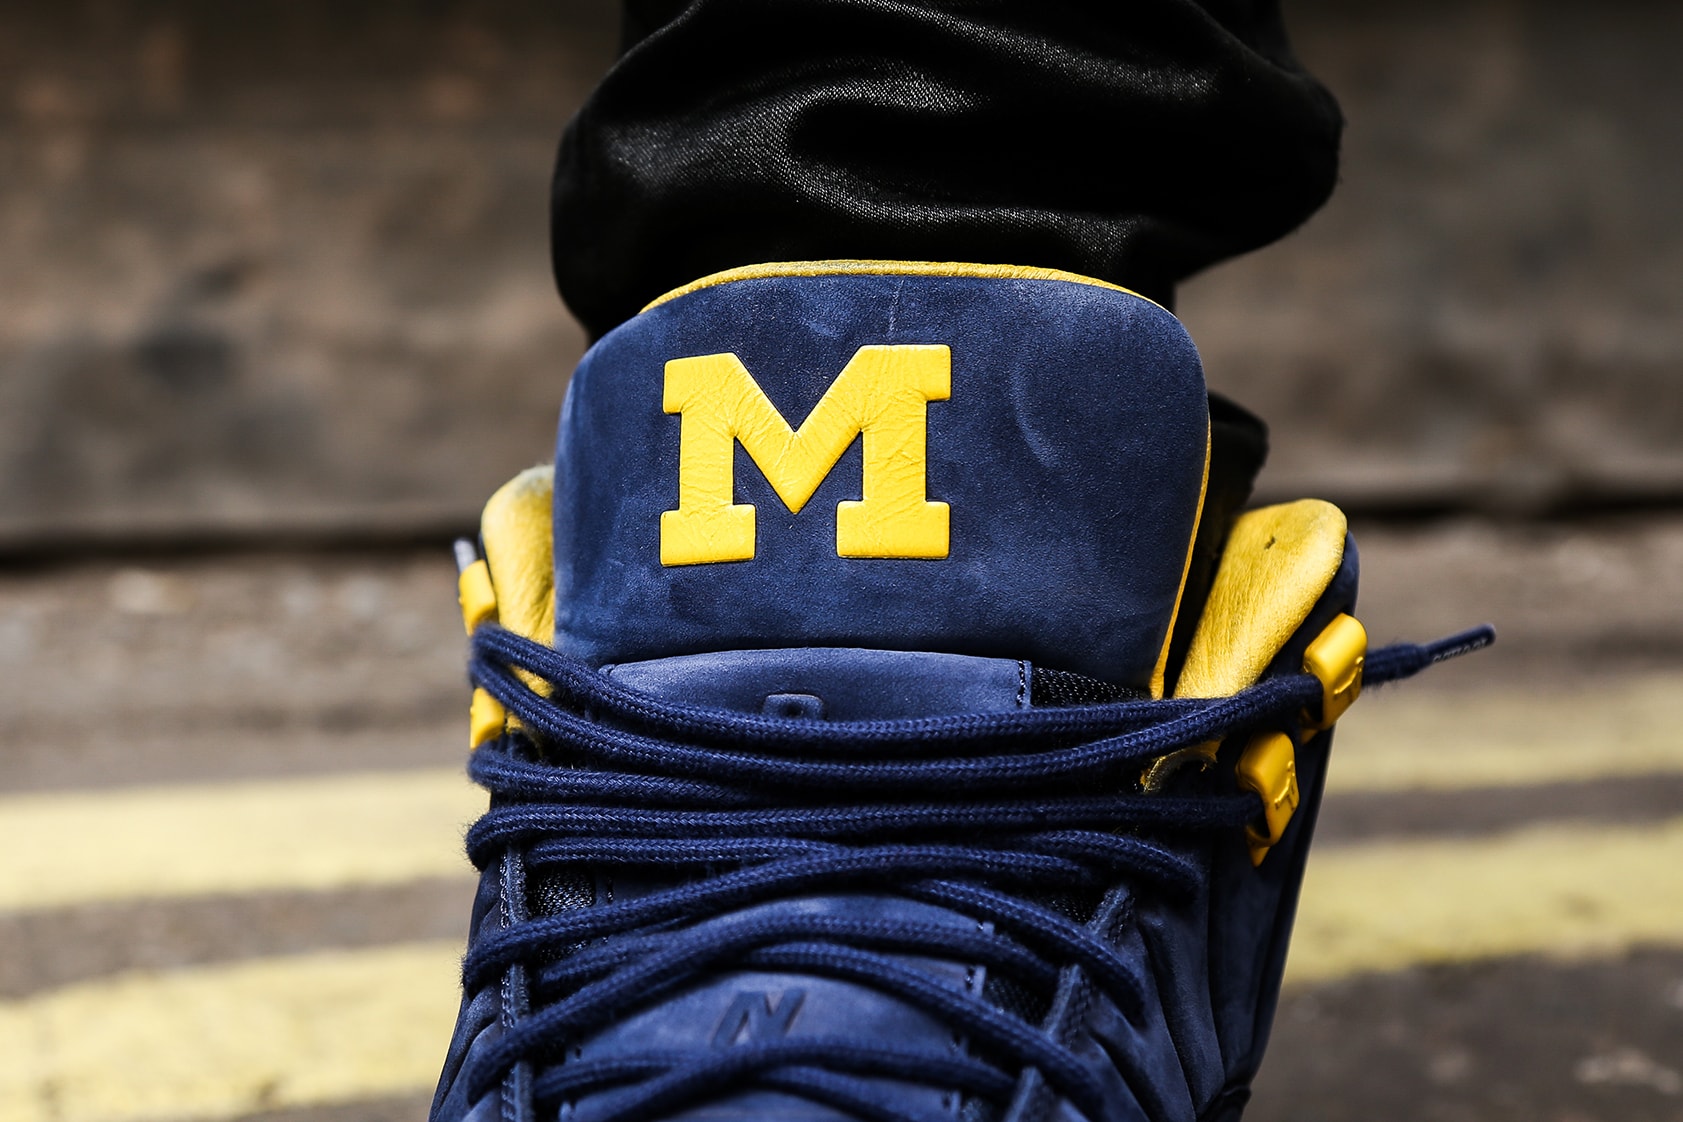 Air Jordan 12 x Public School NY "Michigan" Friends & Family Closer Look Sneakers Kicks Shoes Trainers Collab Collaboration Rare Coming Releasing Soon